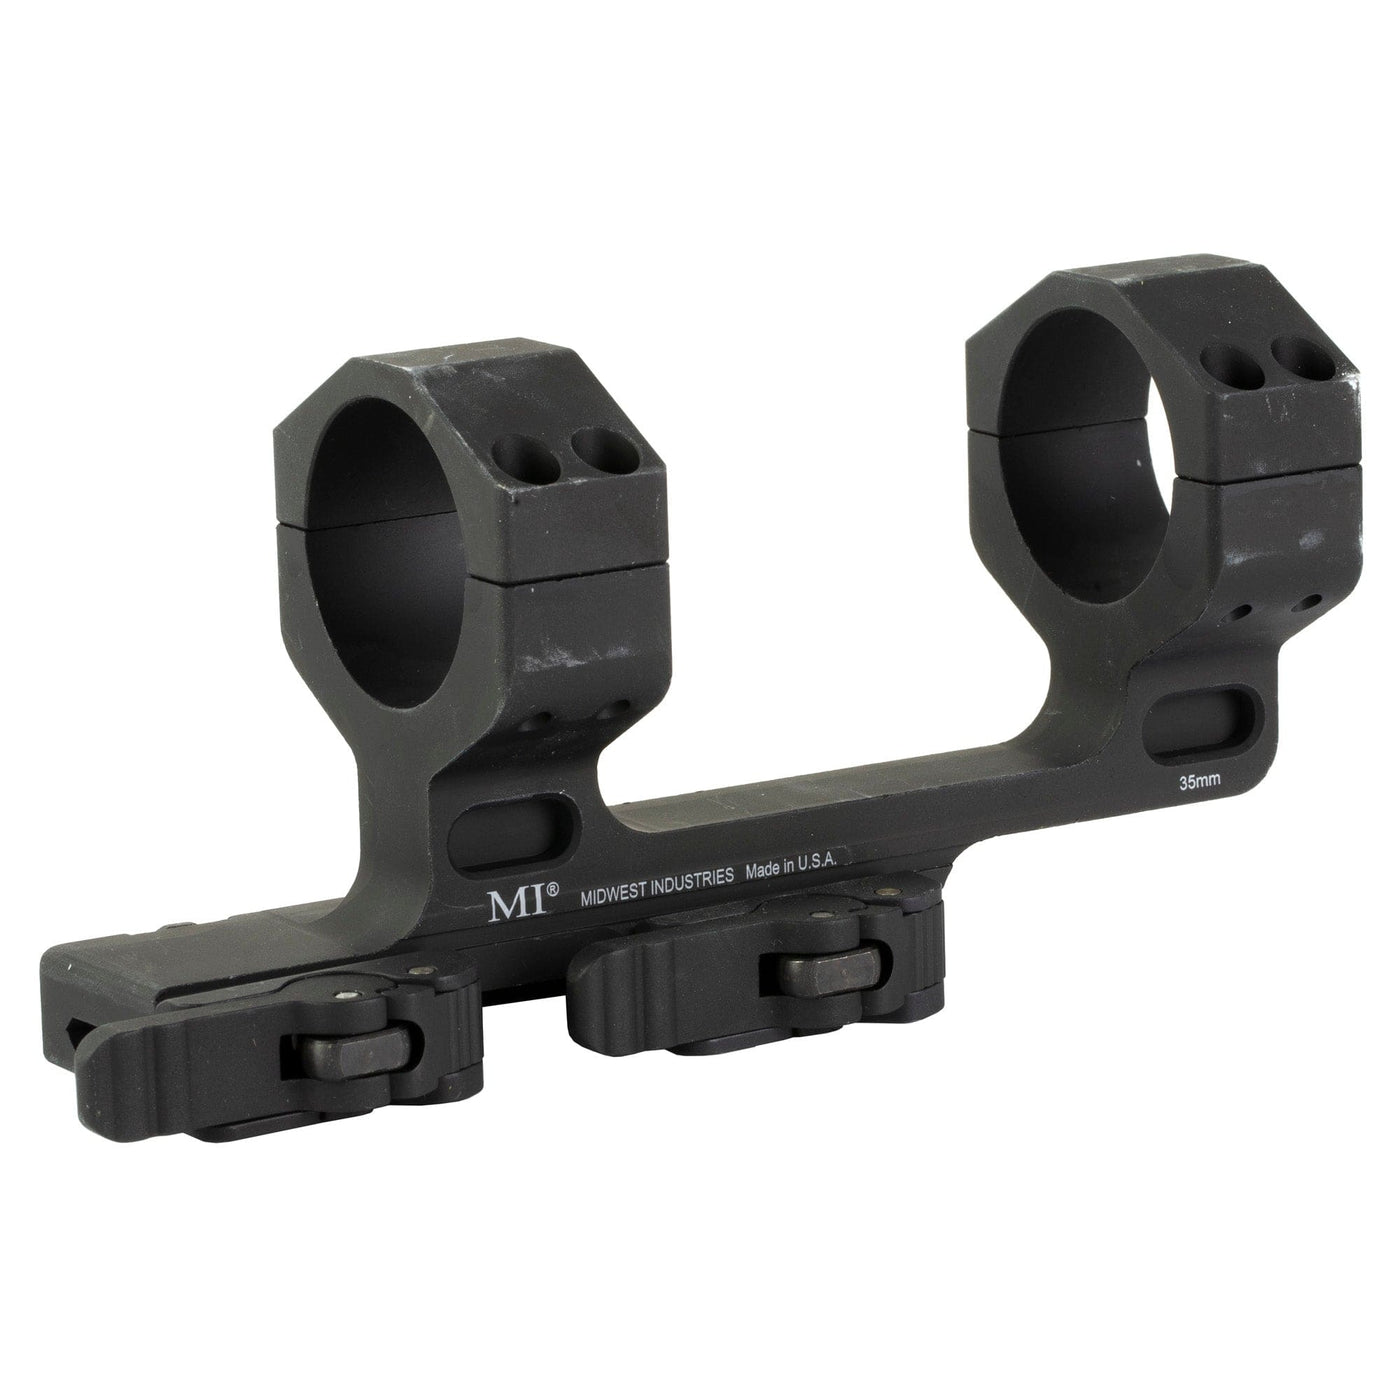 Midwest Industries Midwest Qd Scp Mnt 35mm 1.93 Scope Mounts